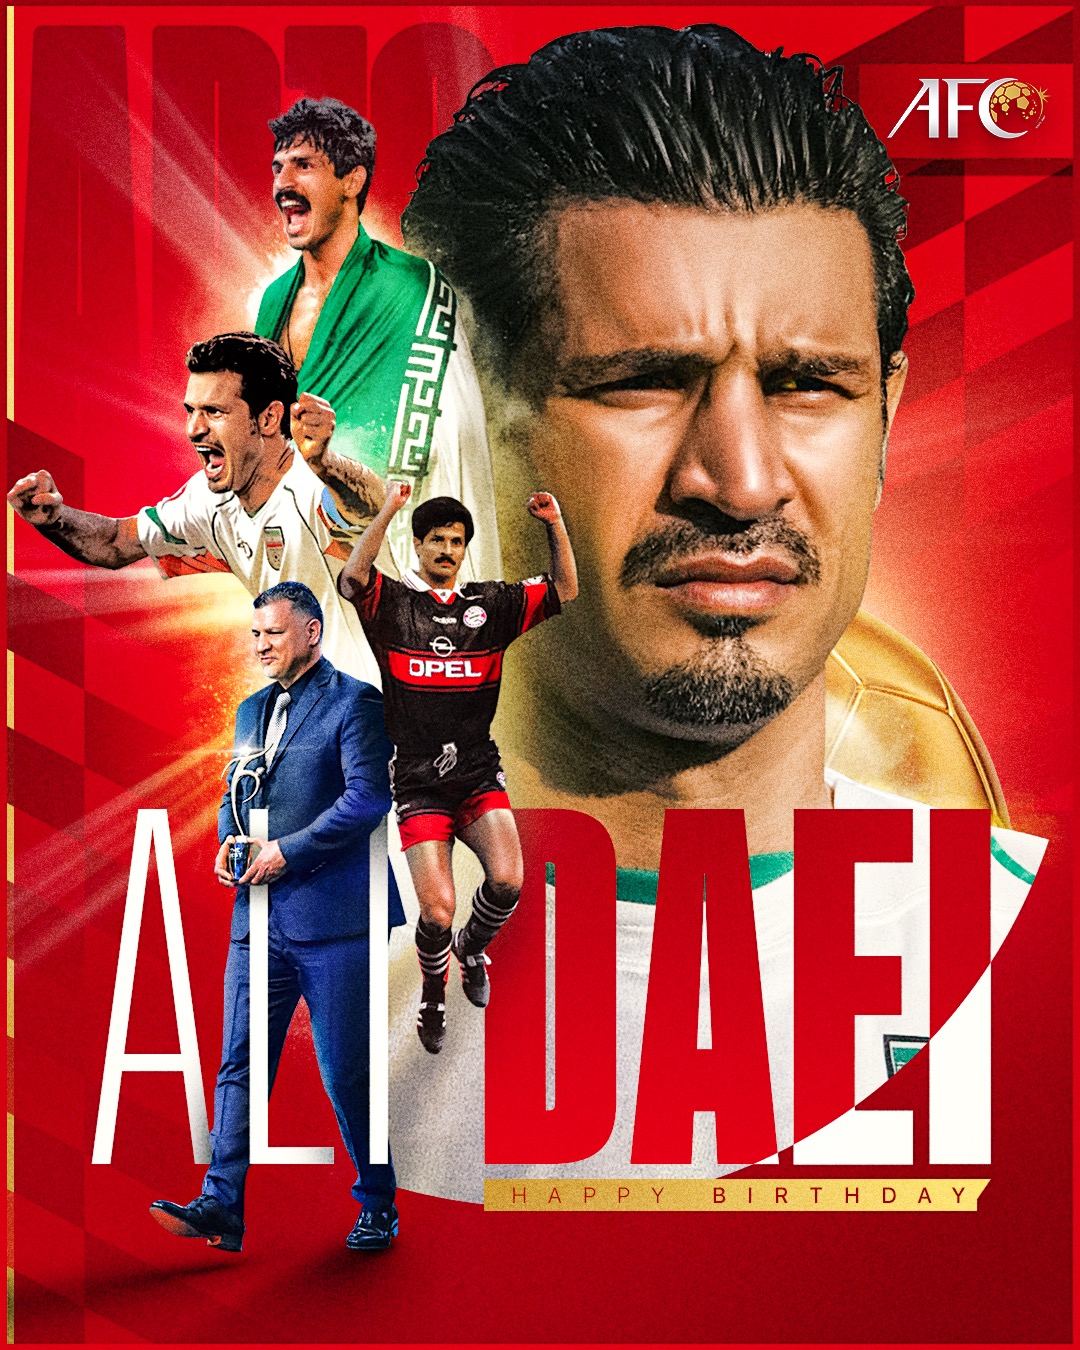 Wishing a very happy birthday to the  Iranian legend who needs no further introduction, Ali Daei!    